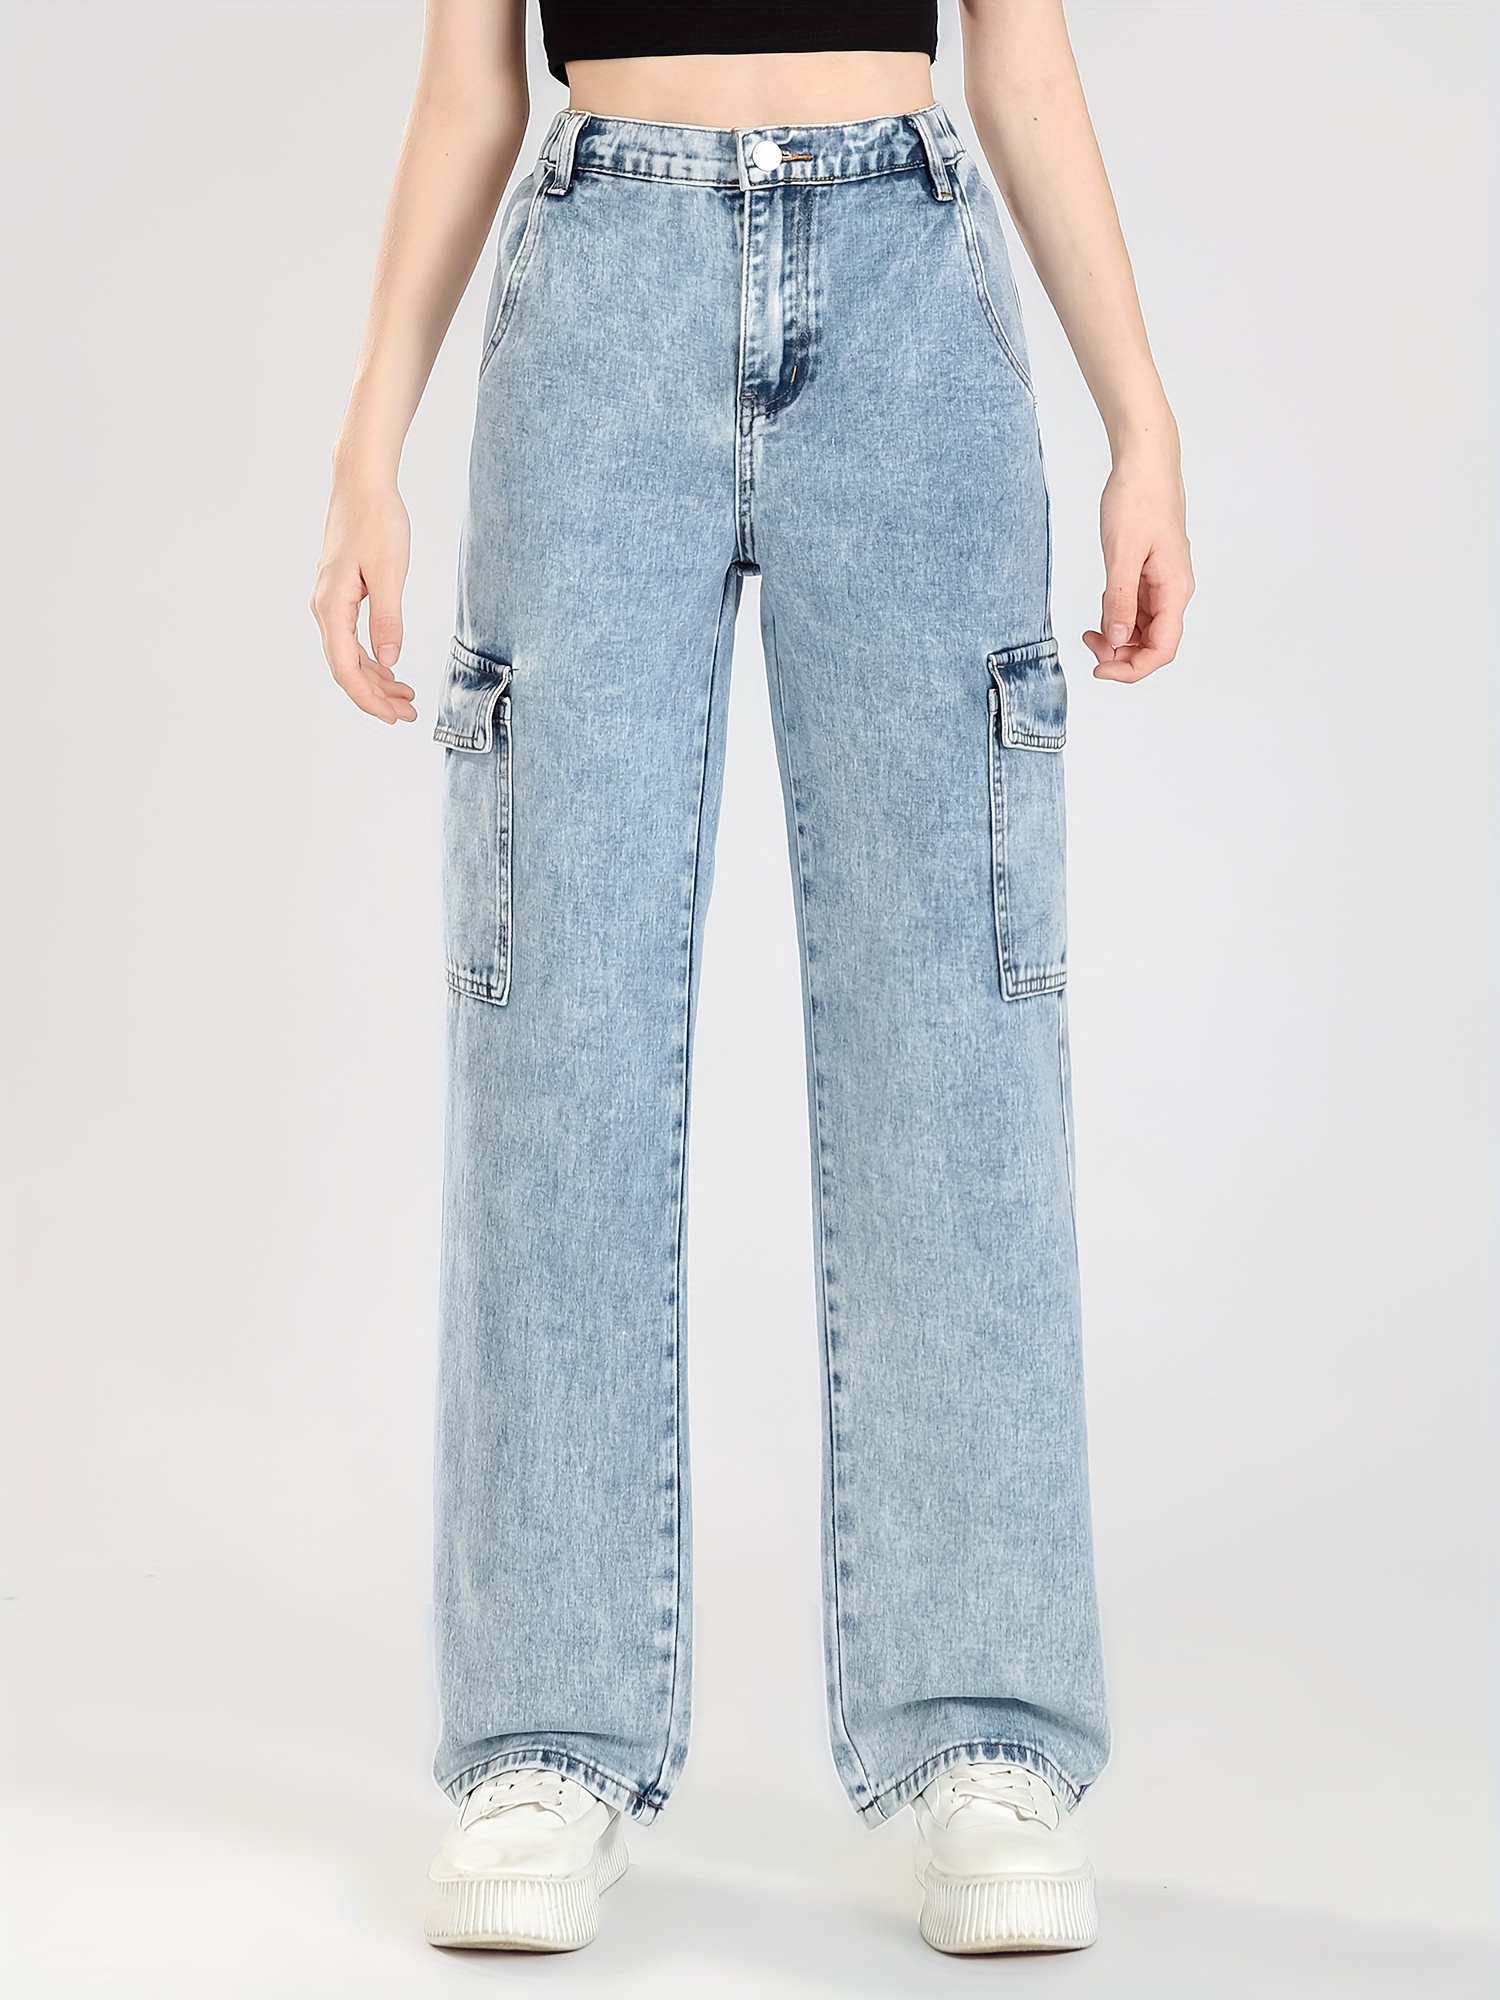 High Waisted Blue Denim Girls Flare Jeans For Teen Girls With Wide